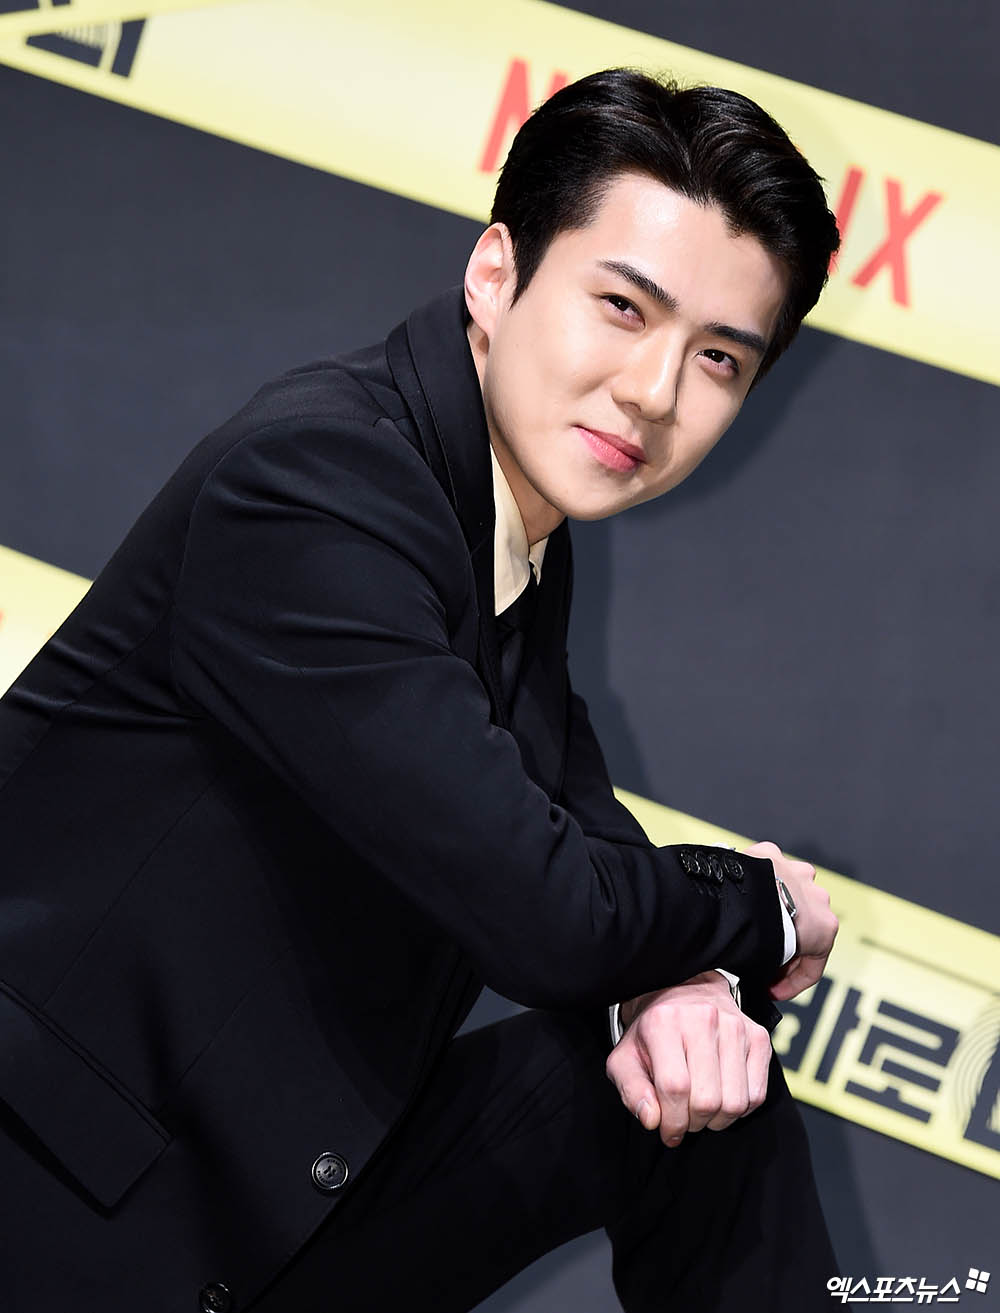 The Netflix original series You are the perpetrator! At the Seoul Sinsa-dong, Gangnam CGV Apgujeong store on the 8th.EXO Sehun, who attended the Season 2 production presentation, has photo time.